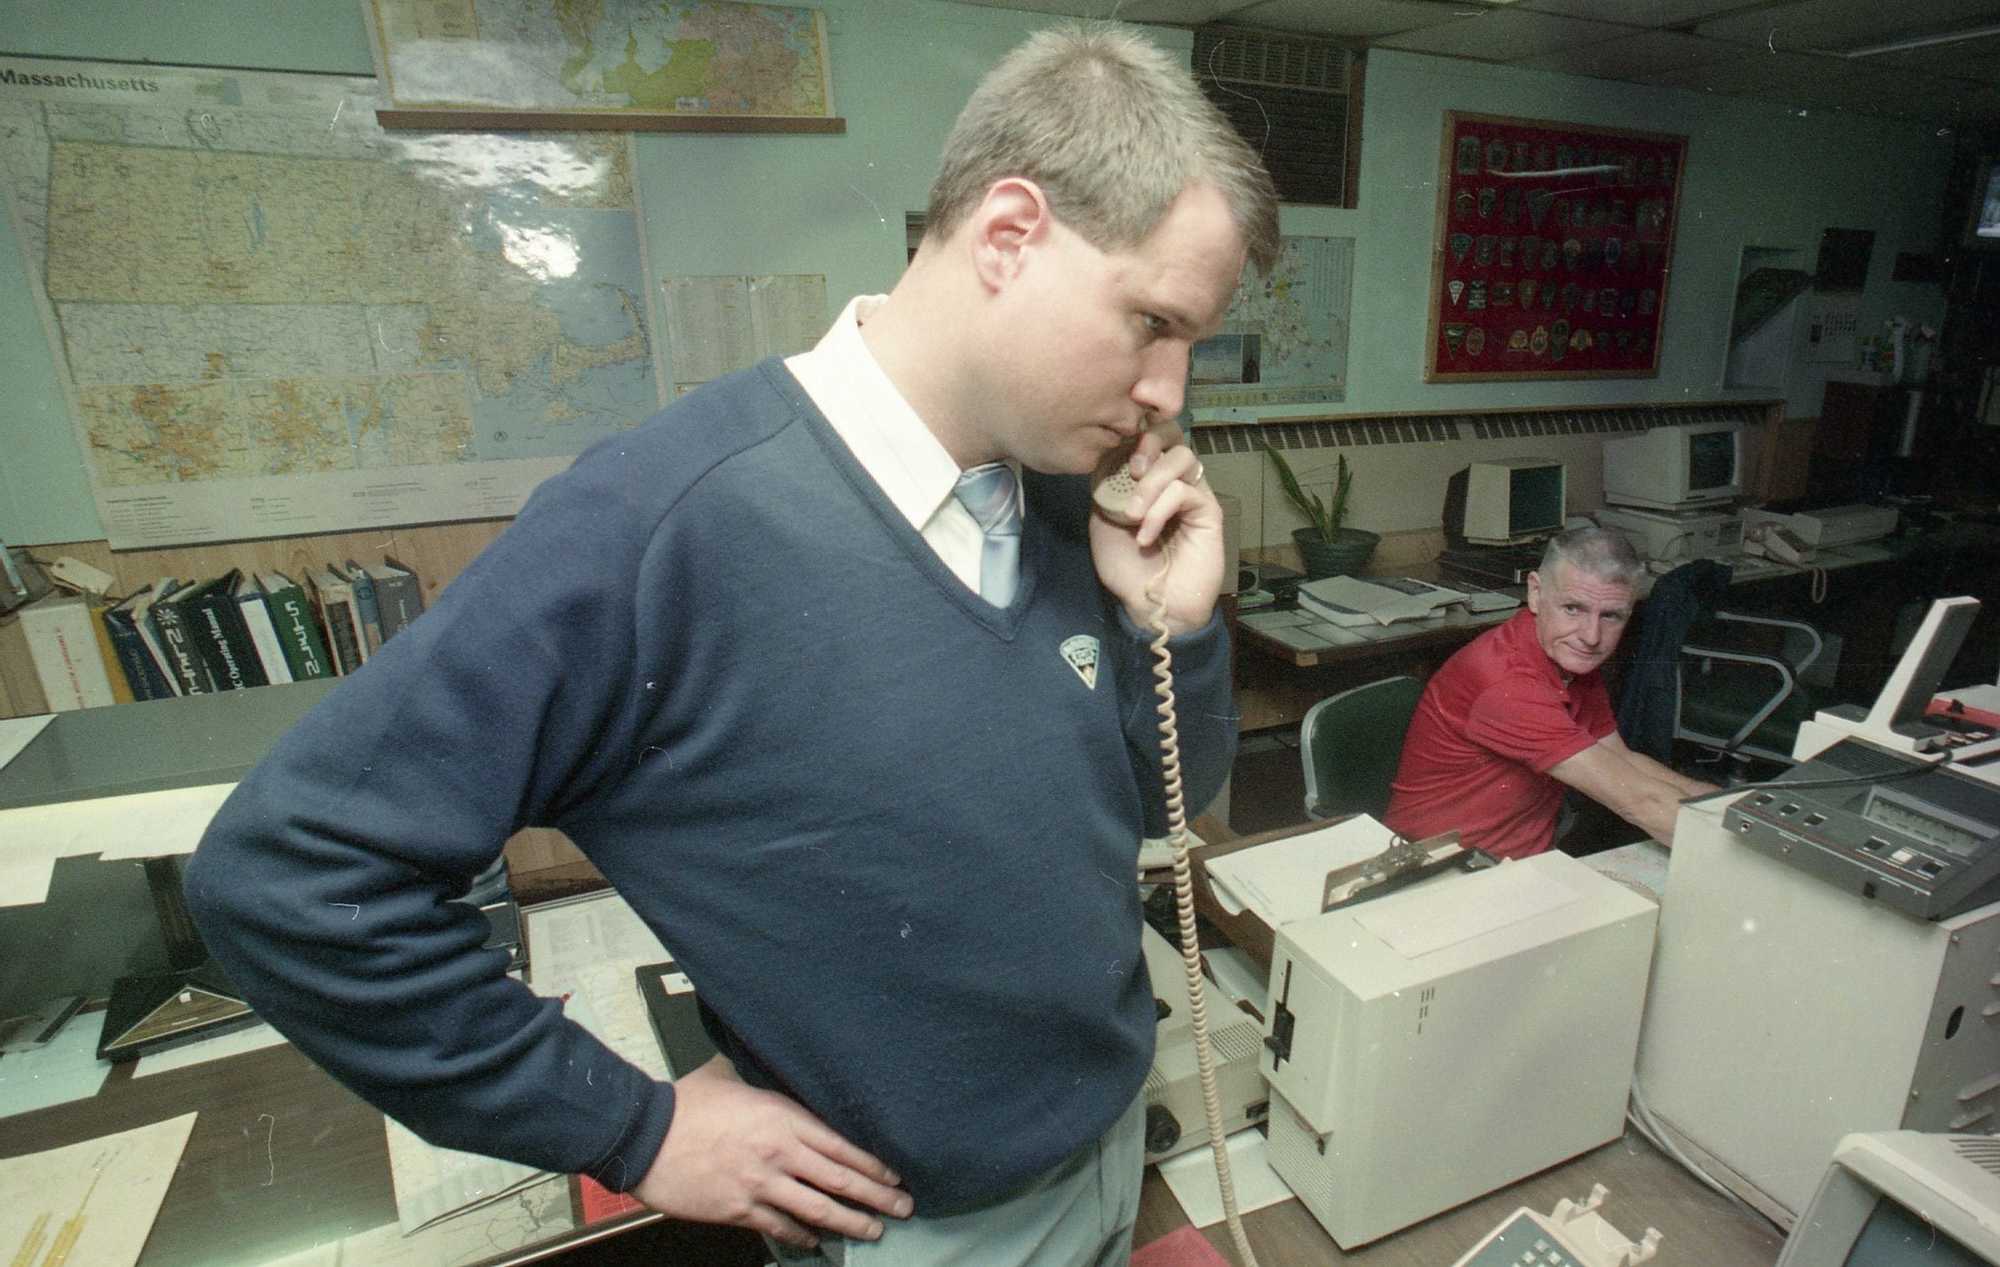 Massachusetts State Trooper Gary McLaughlin worked the phones, while dispatcher Jack Moran did the same in the background at State Police on Oct. 24, 1989. McLaughlin was the dispatcher who spoke with Charles Stuart and helped direct emergency personnel to his location the night of the murder.